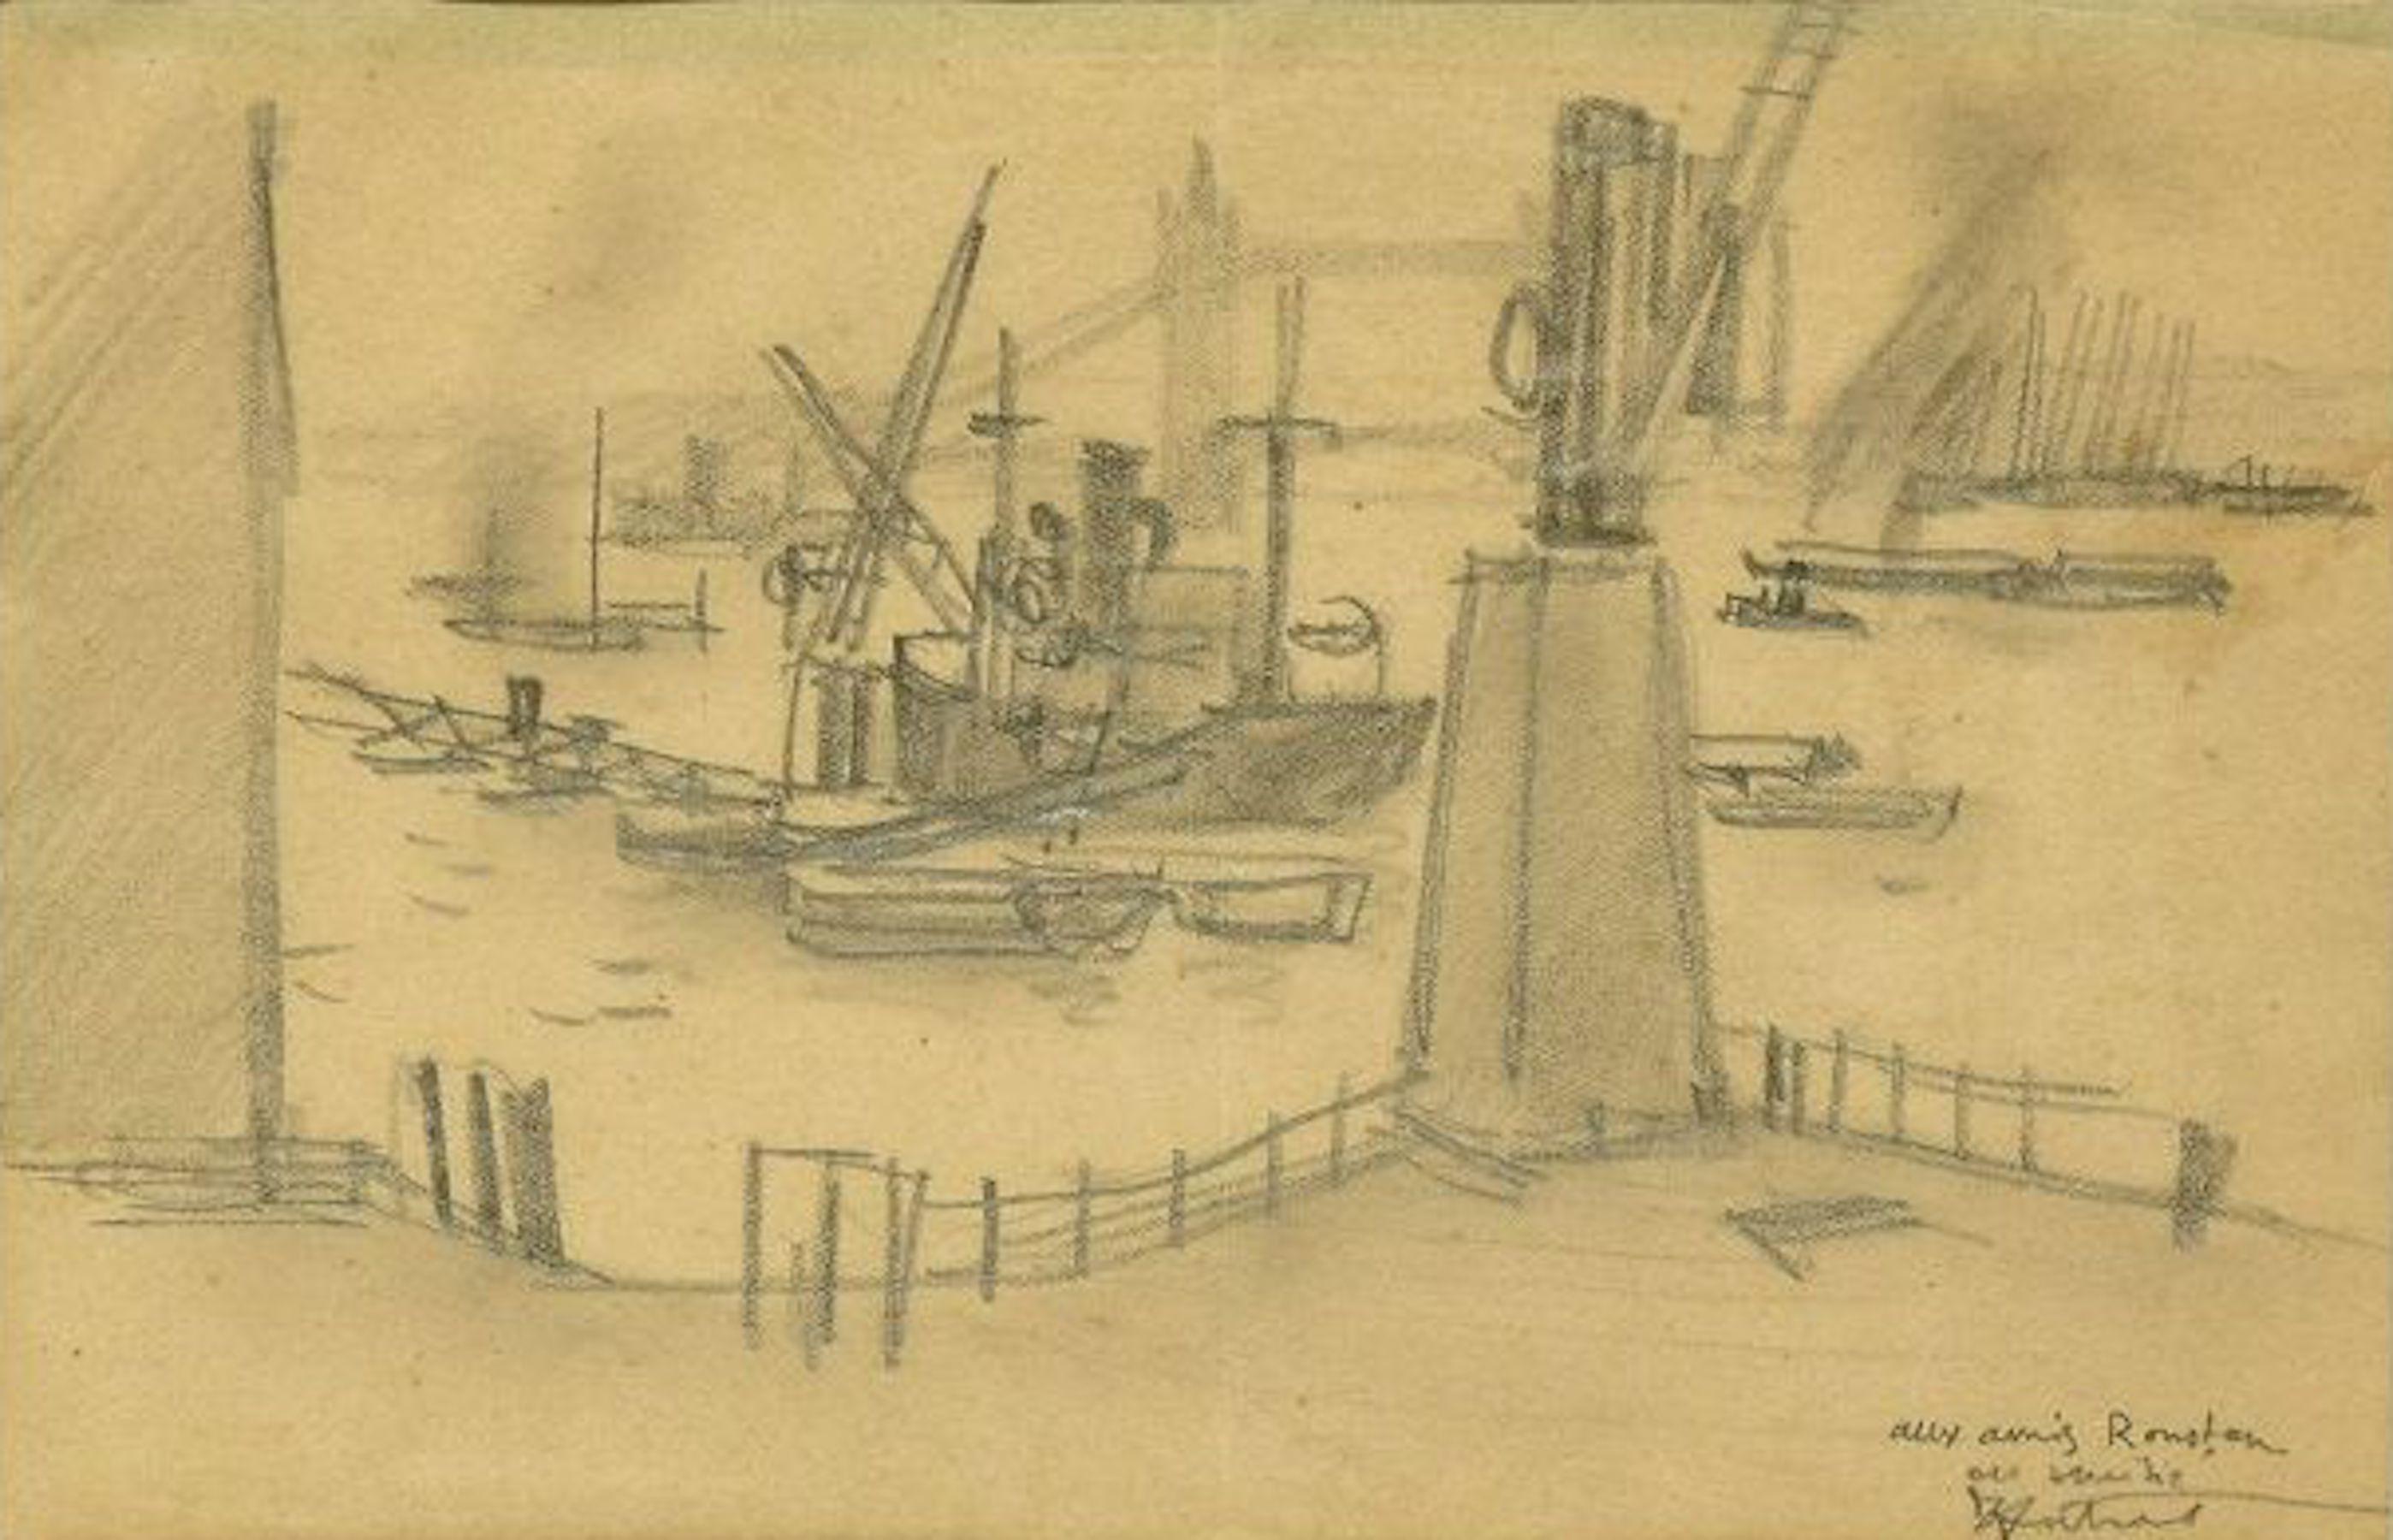 Robert Louis Antral Figurative Art - London Harbor - Charcoal Drawing by R.L. Antral - 1930s